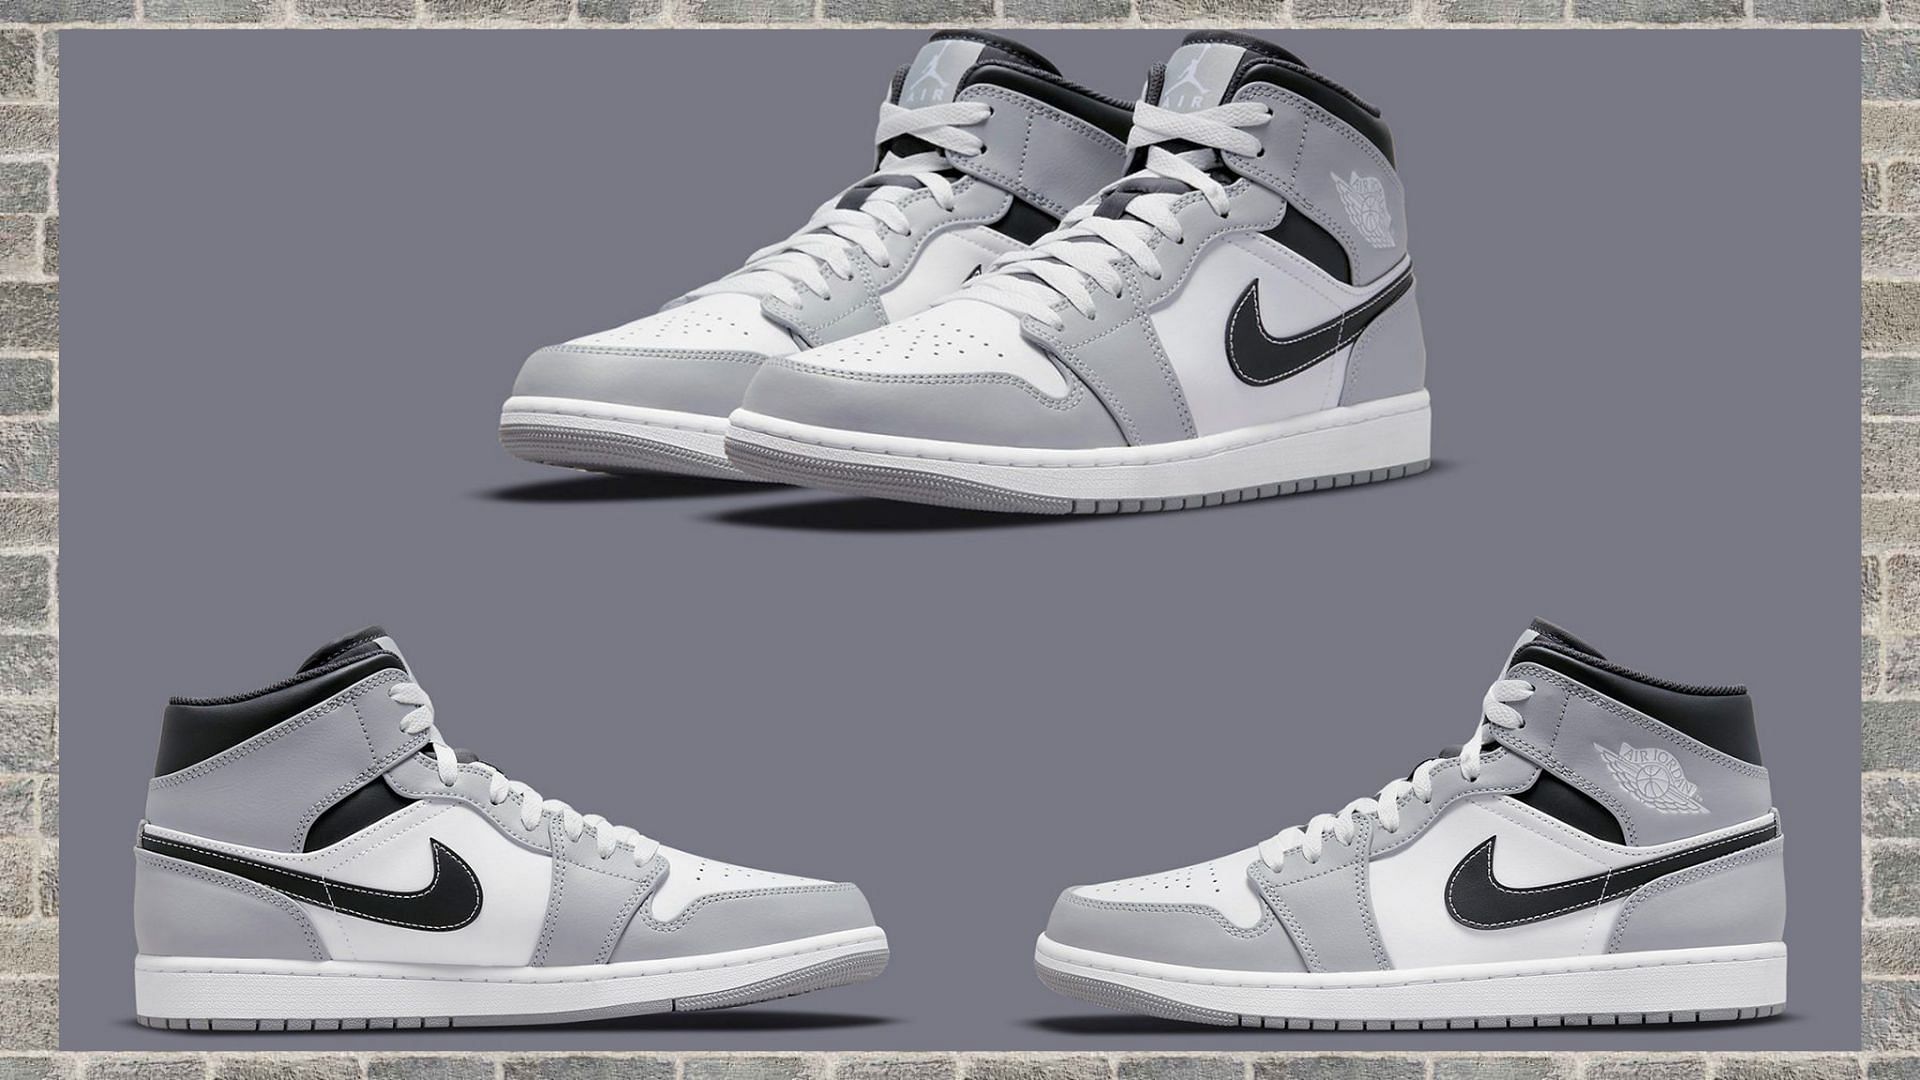 Where to buy Air Jordan 1 Mid Light Smoke Grey sneakers? Price, release date and more details explored 